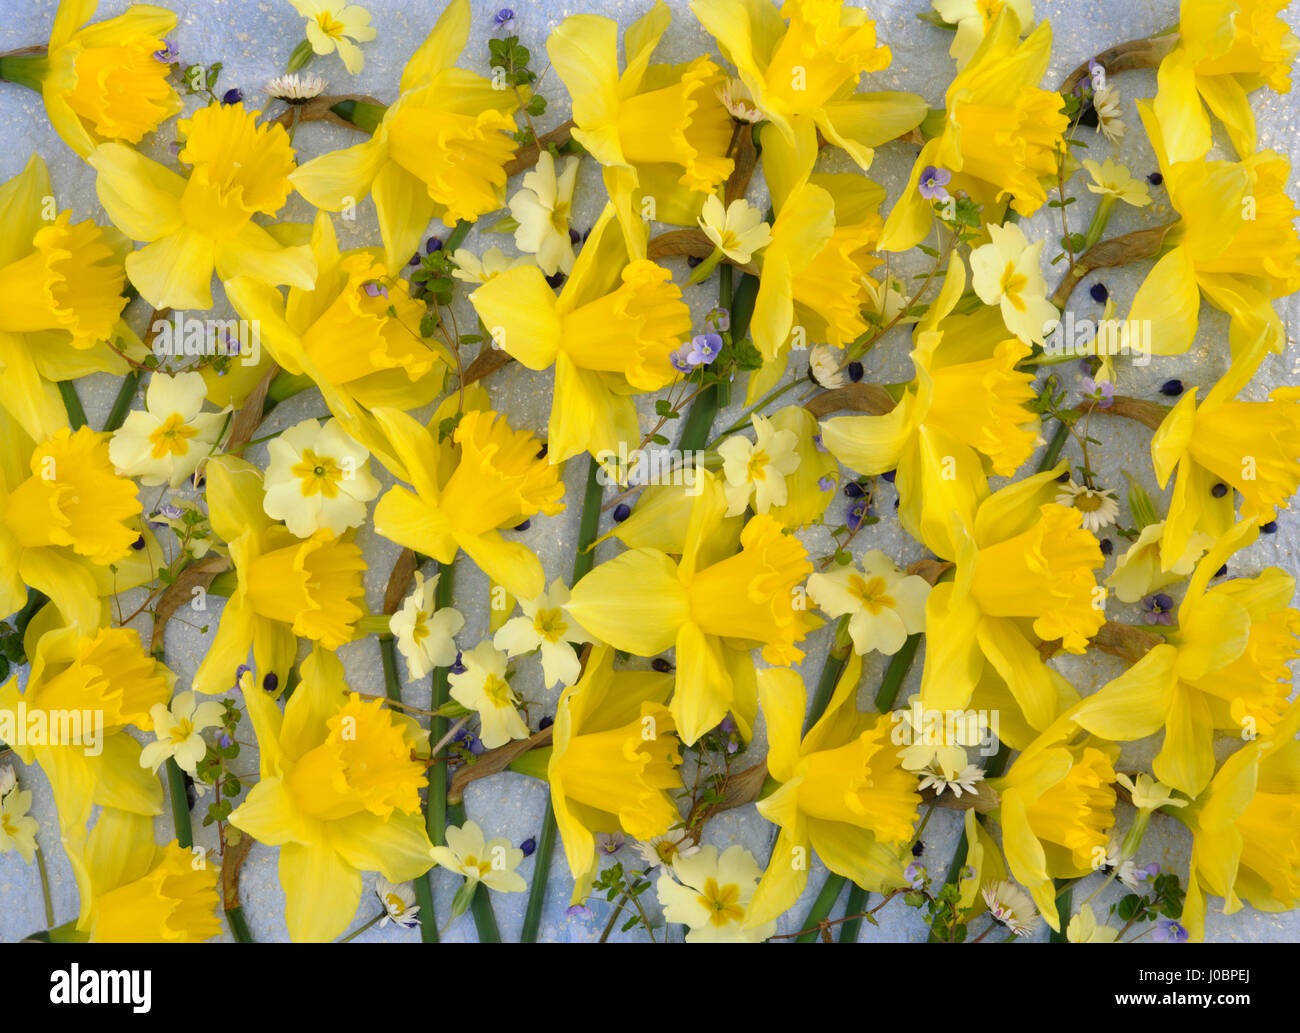 Daffodil, primrose and speedwell flowers arranged on pale blue speckled tissue paper background to create the effect of millefleurs Stock Photo